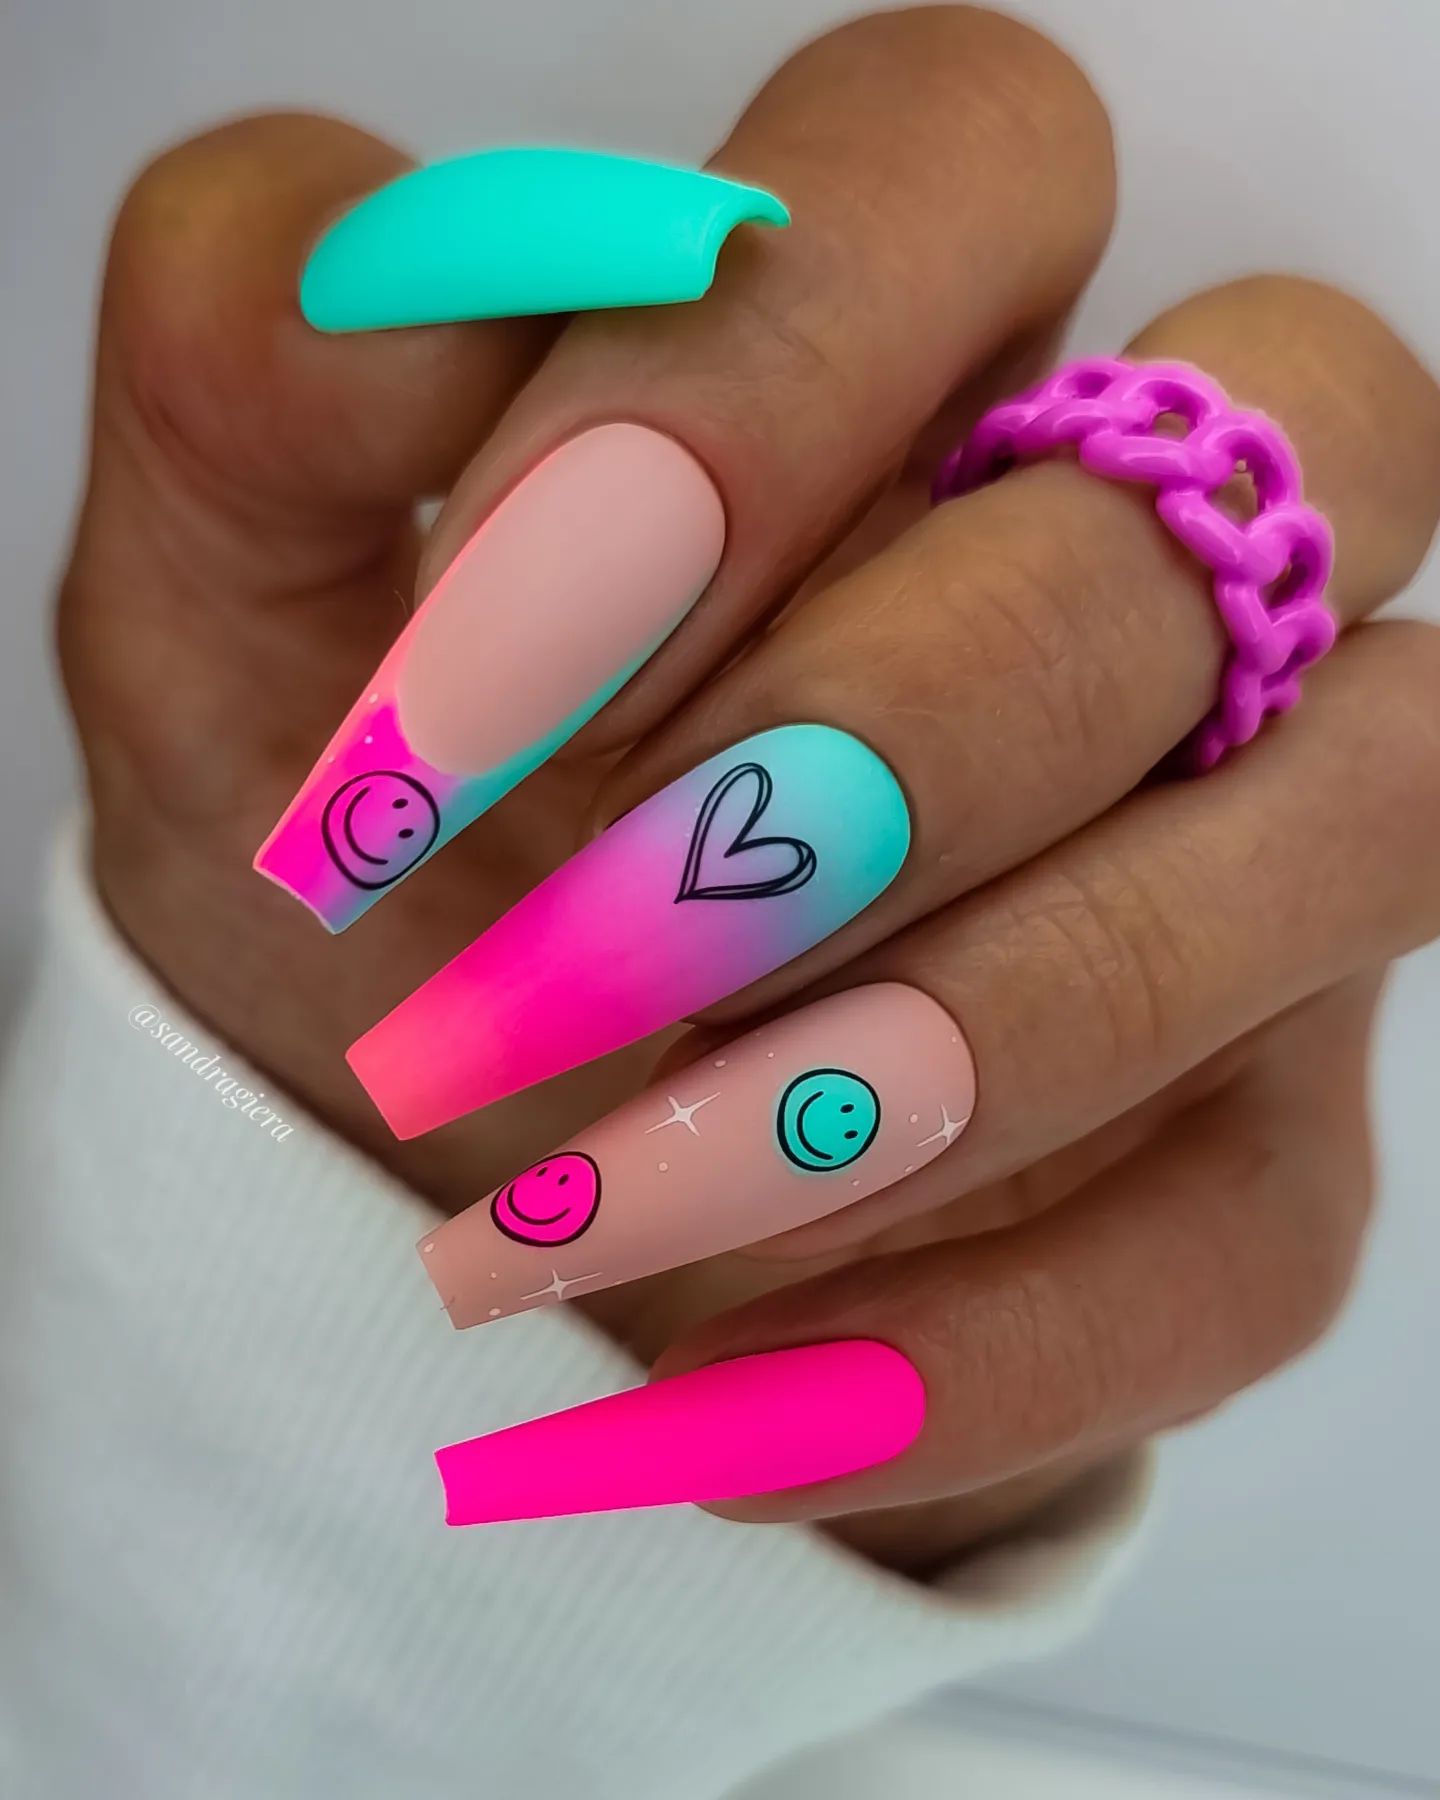 Turquoise and pink colors are so bright, and the pink is a great contrast to the turquoise. Three different nail designs are used such as French mani, ombre and smiley face nails. This nail style is perfect for summer!